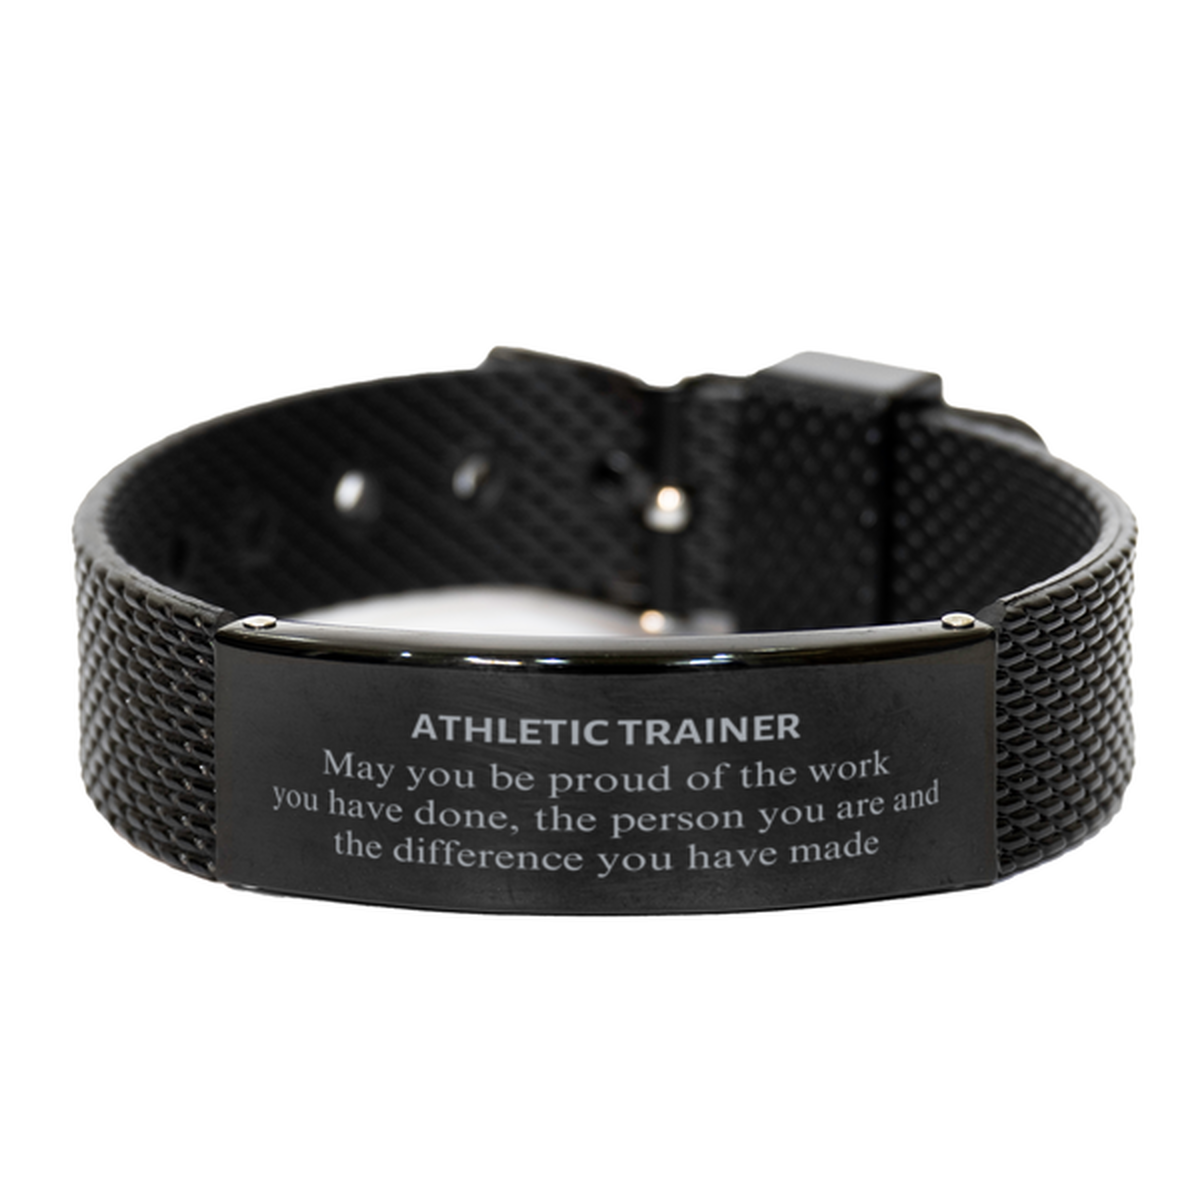 Athletic Trainer May you be proud of the work you have done, Retirement Athletic Trainer Black Shark Mesh Bracelet for Colleague Appreciation Gifts Amazing for Athletic Trainer